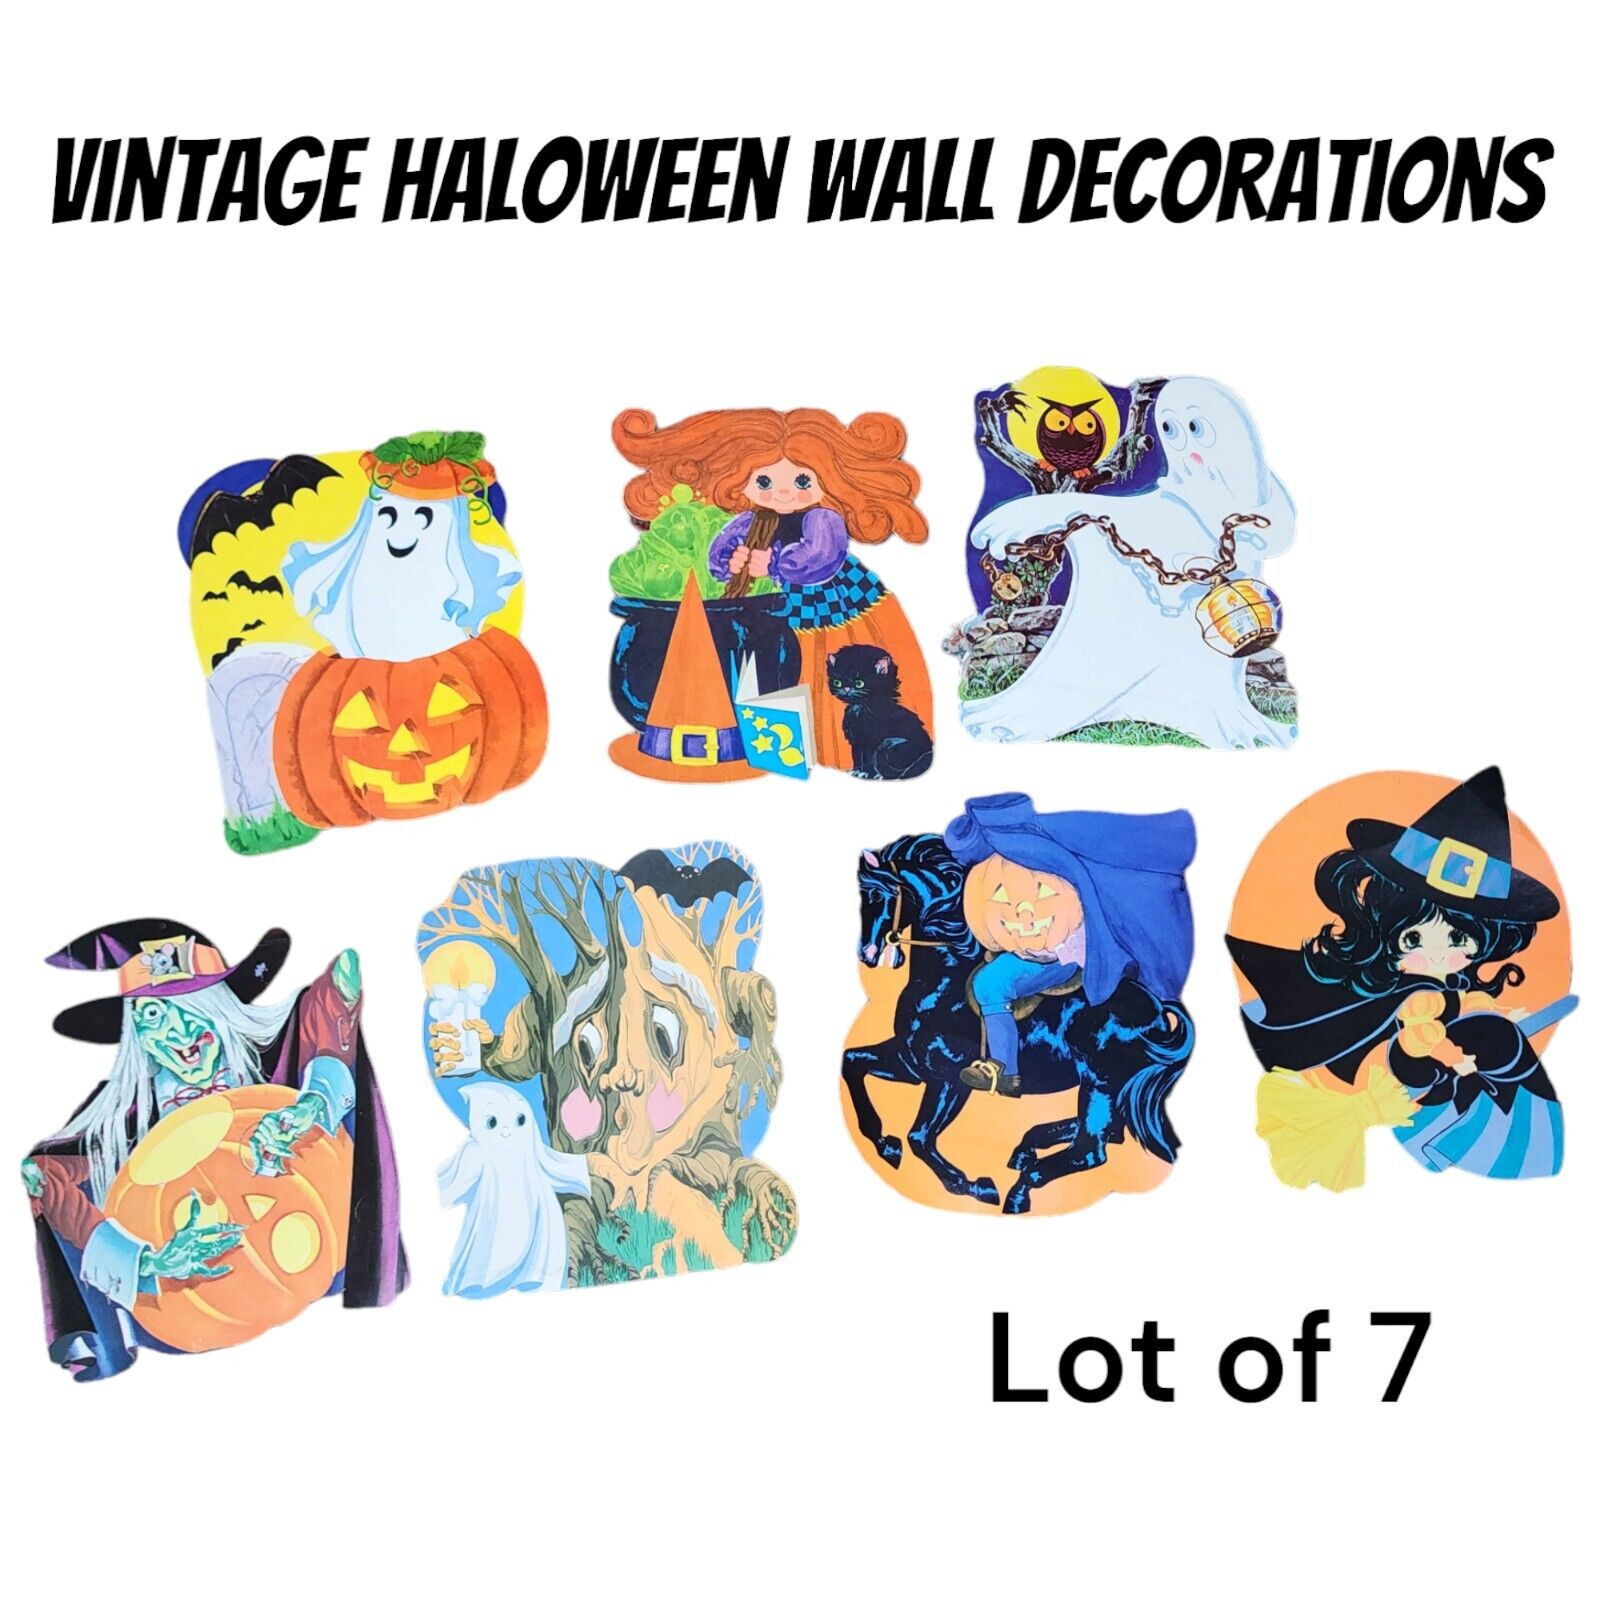 HALLOWEEN VINTAGE 6pc Small Wall Decorations Ghost Witch Jack O Lantern Moon Bat